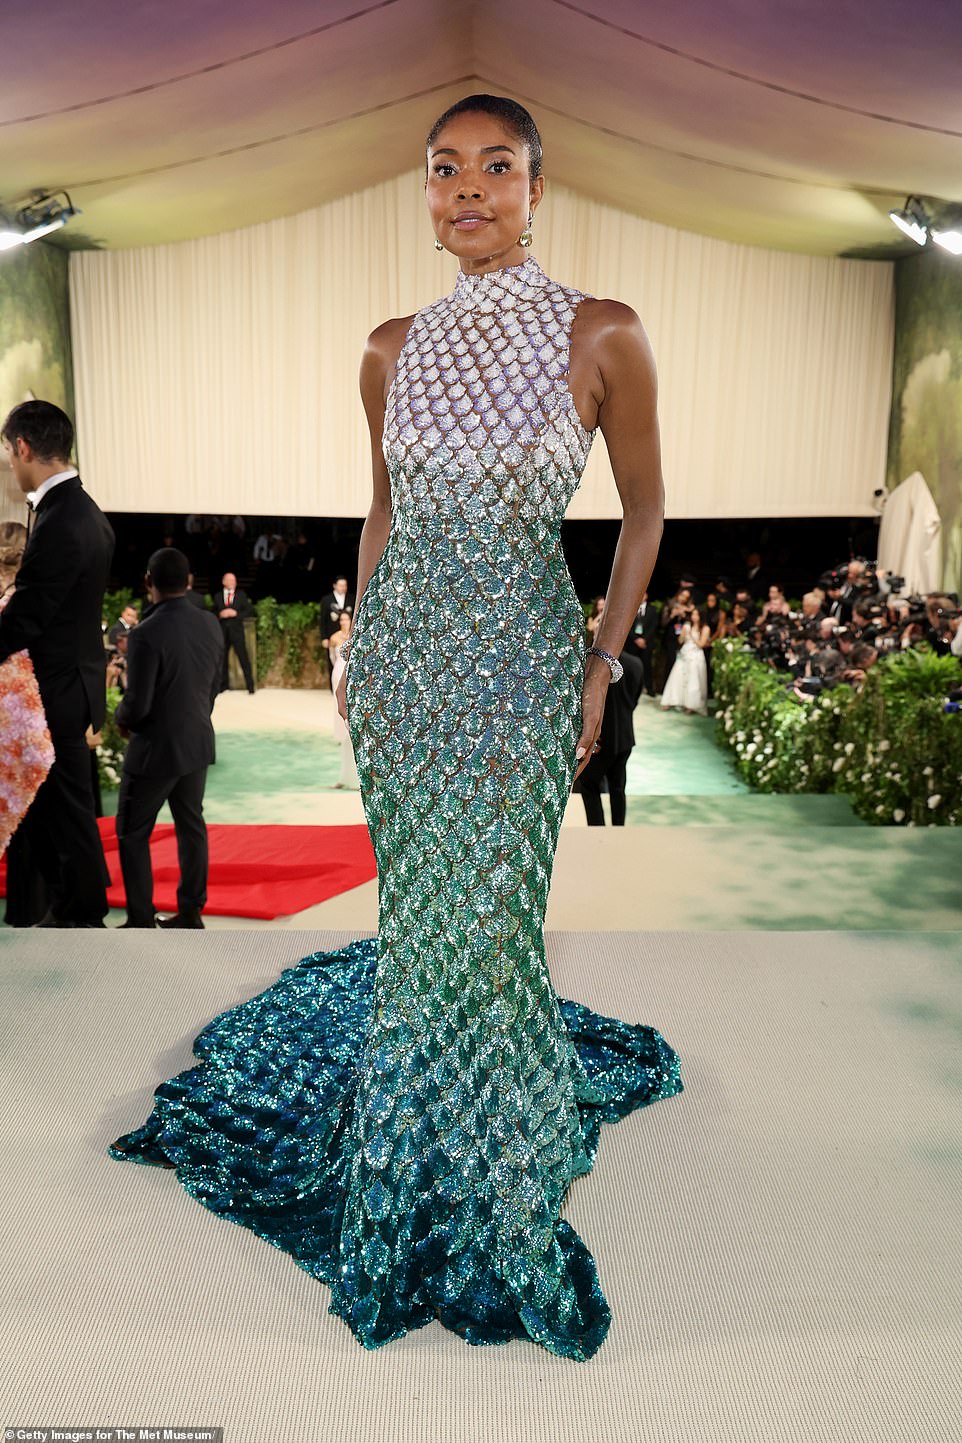 Gabrielle Union looked like a mermaid in a silver, green and blue ombre frock